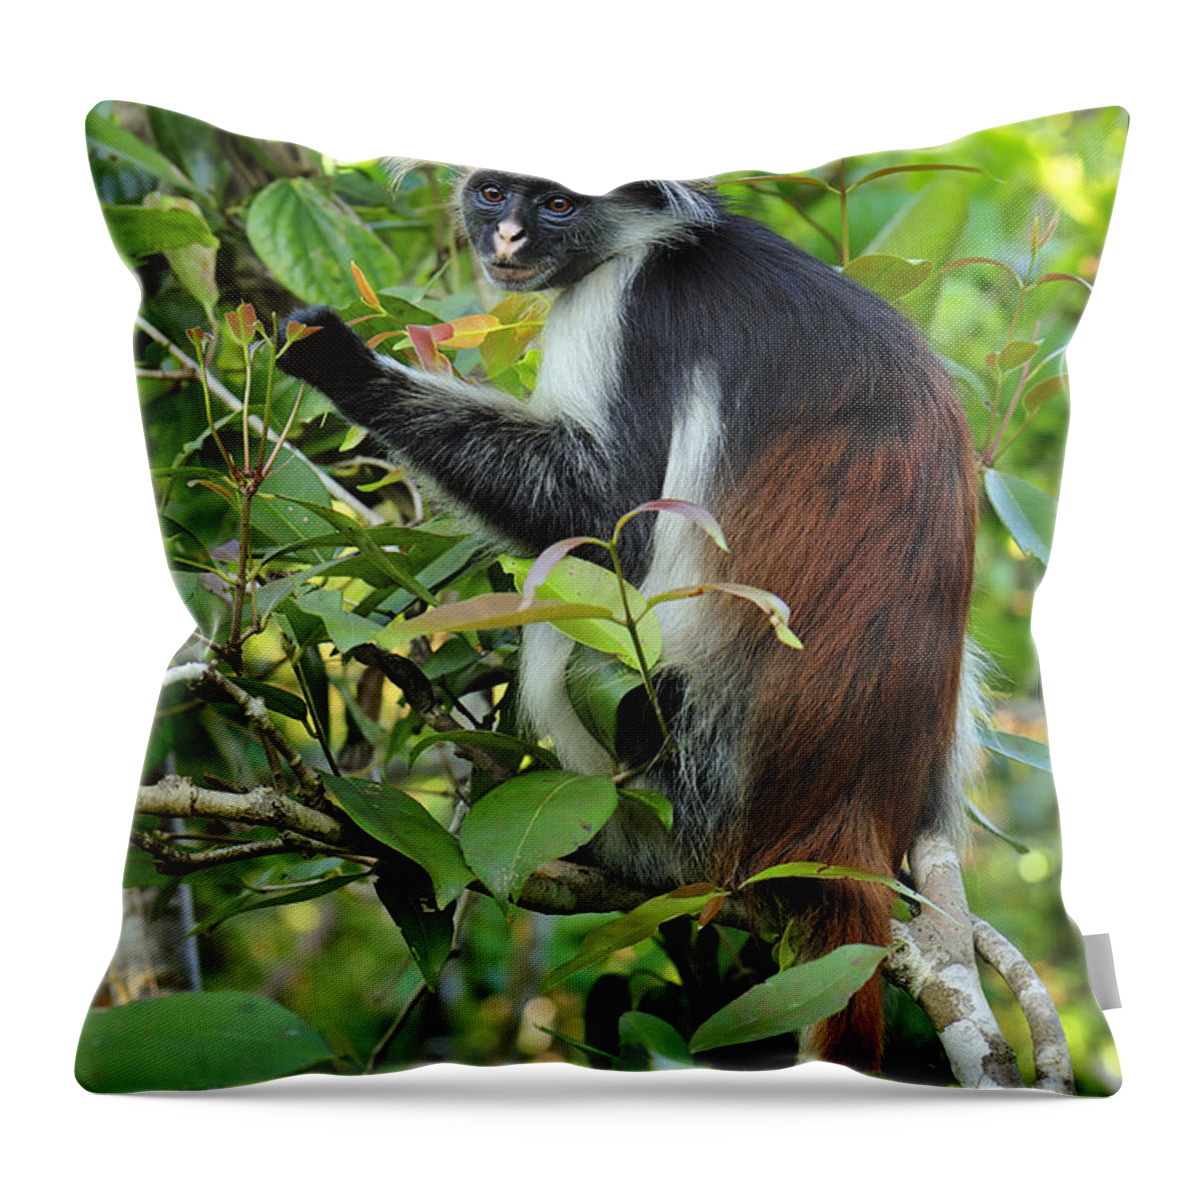 Thomas Marent Throw Pillow featuring the photograph Zanzibar Red Colobus In Tree Jozani by Thomas Marent